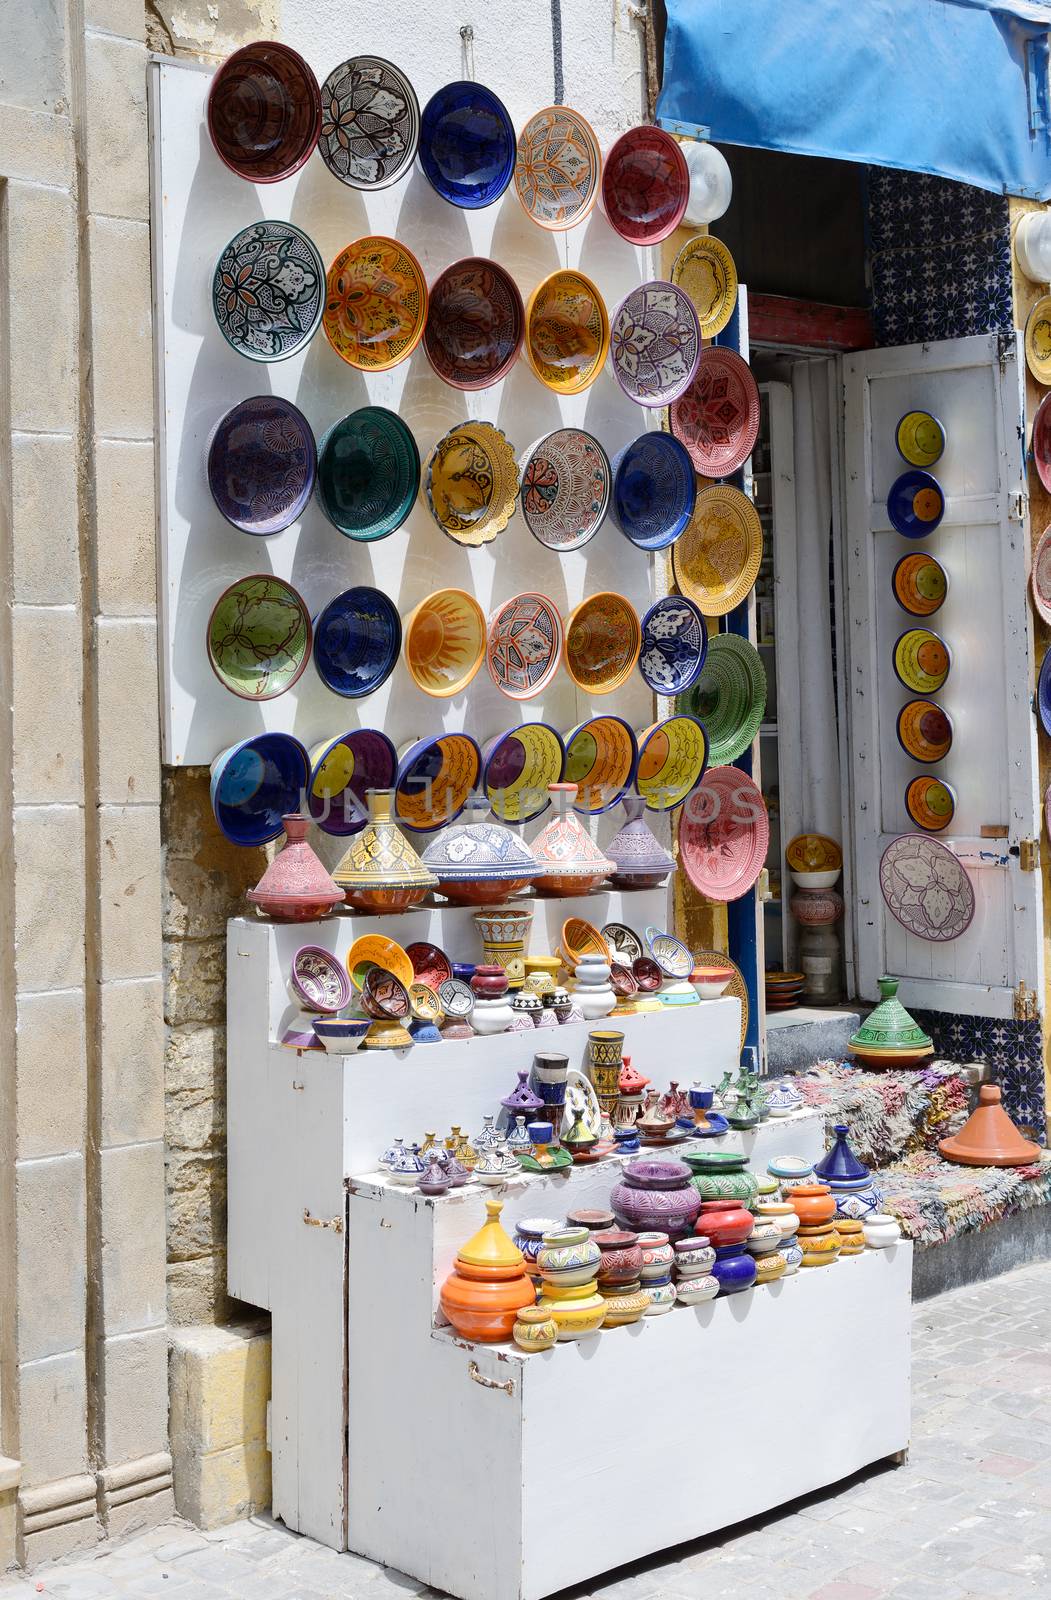 Morocco shop front by kmwphotography